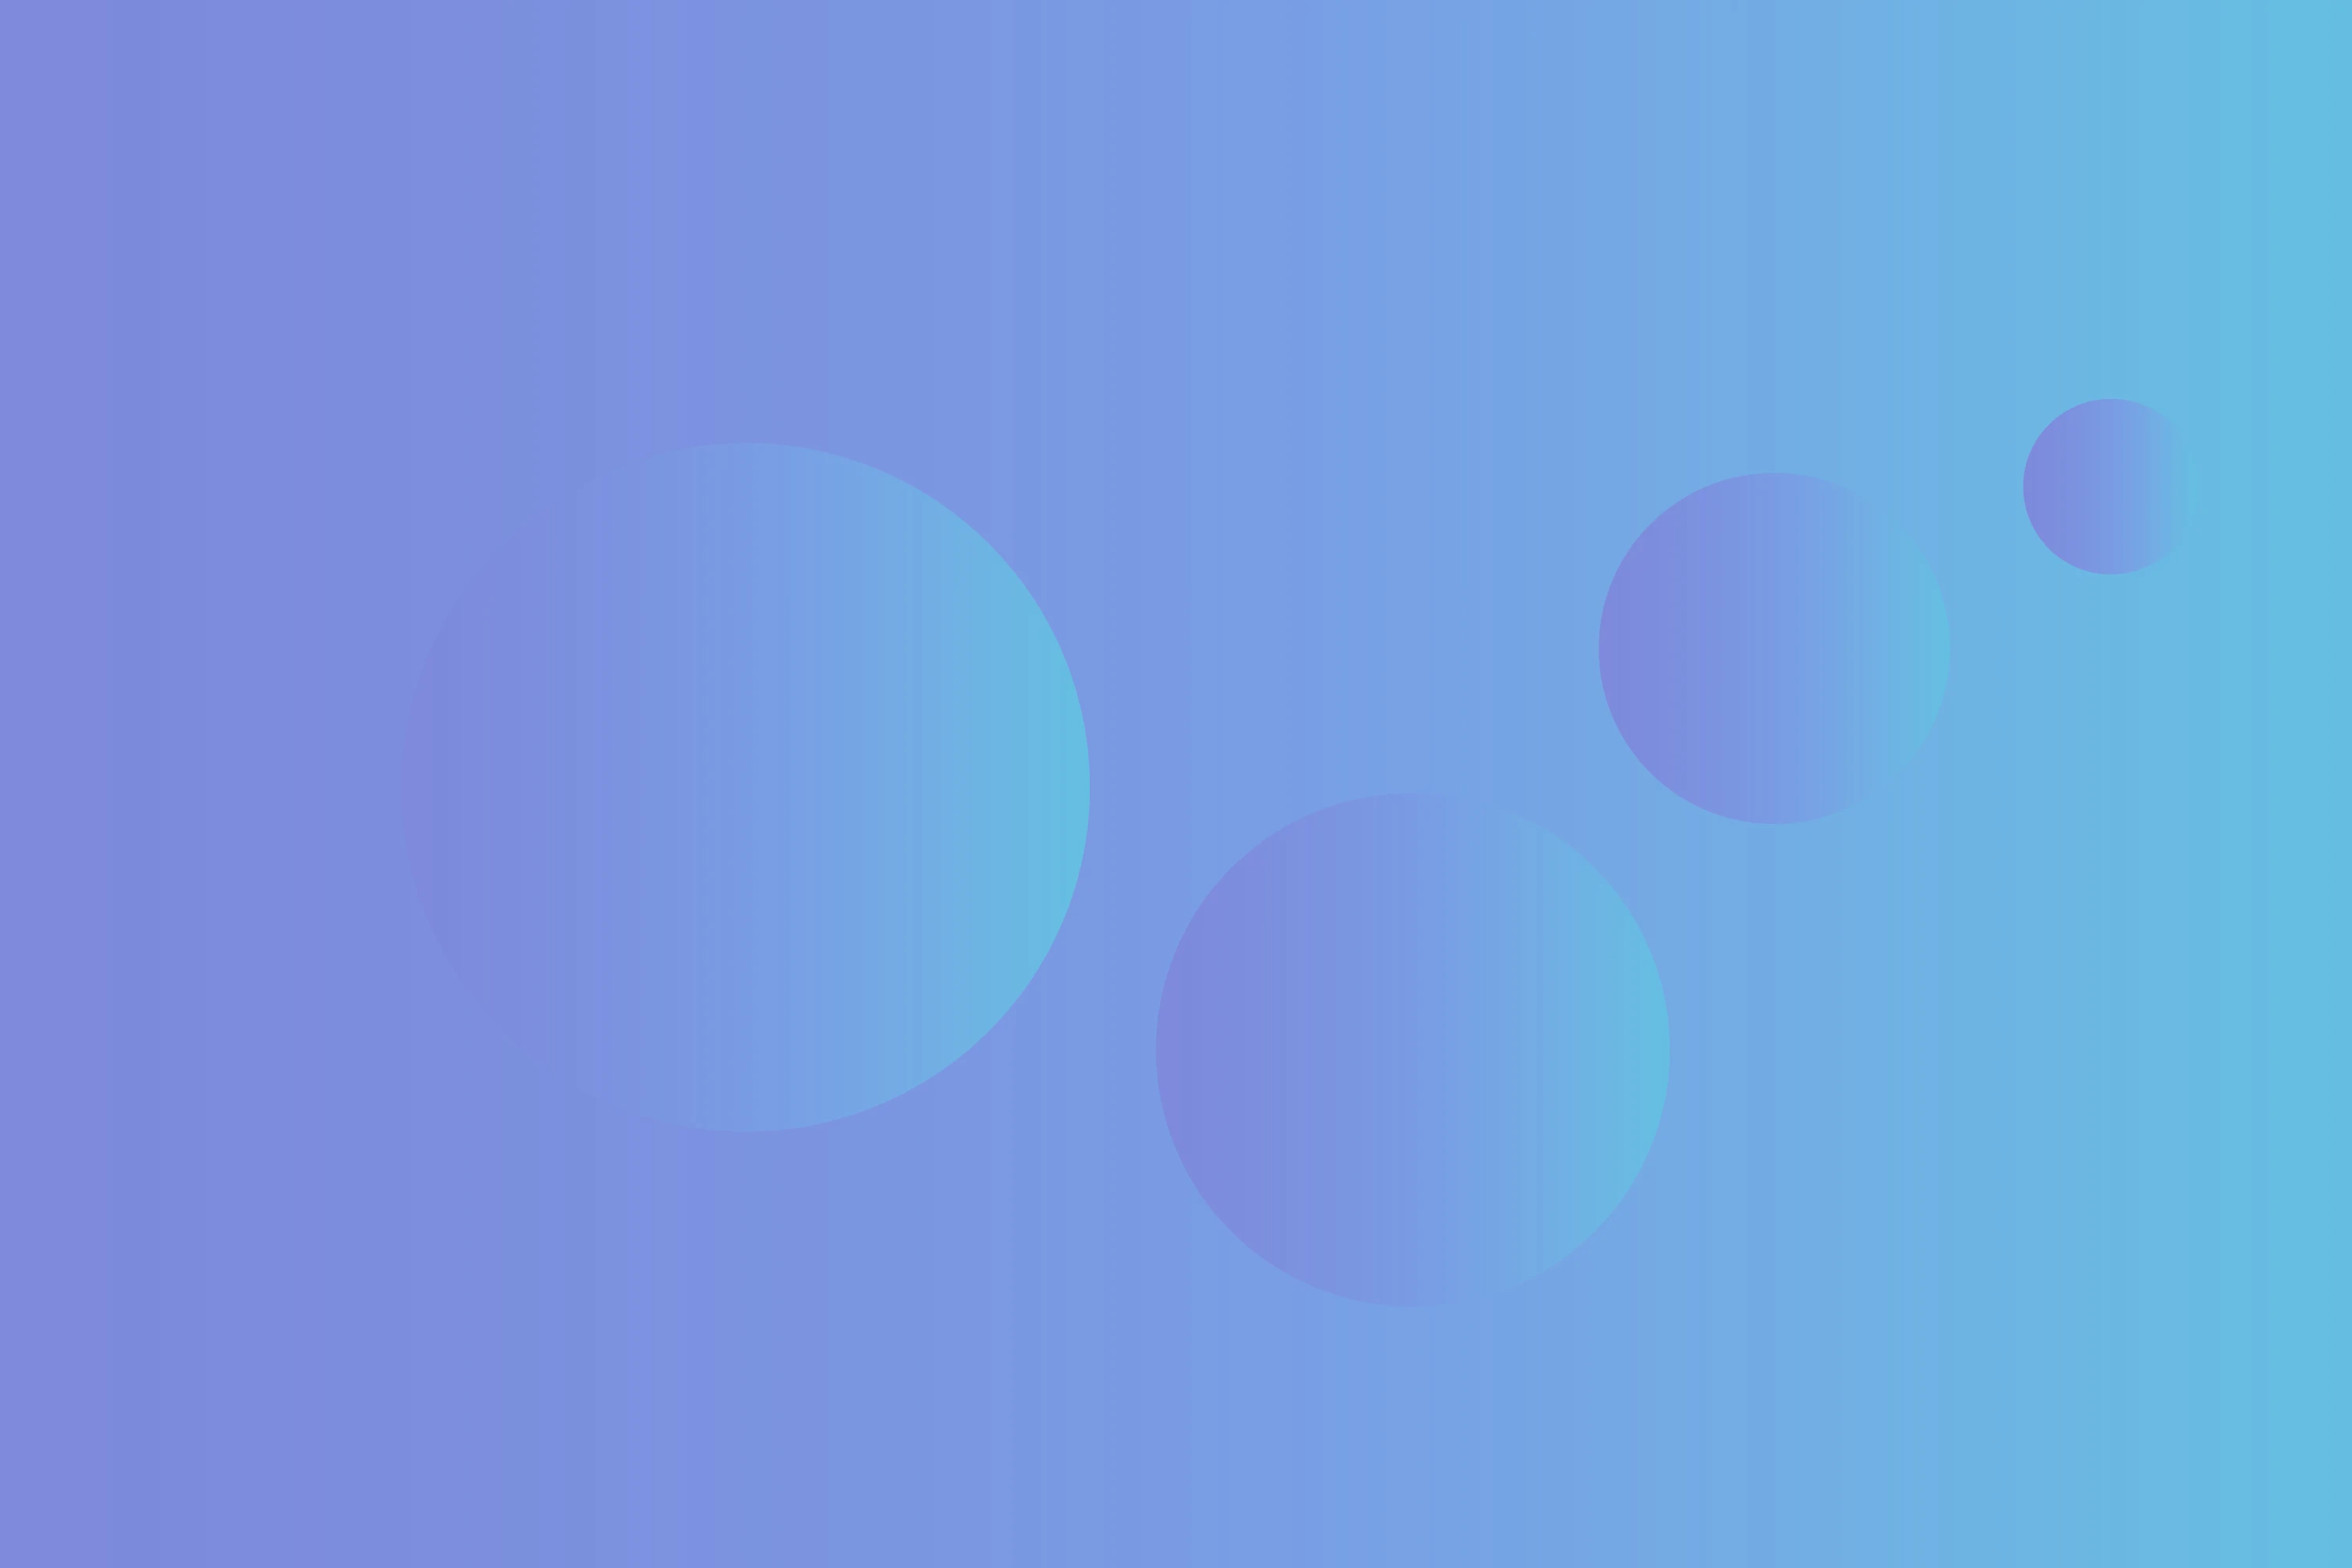 r187-blue-balls-recolored-16980960357252.png